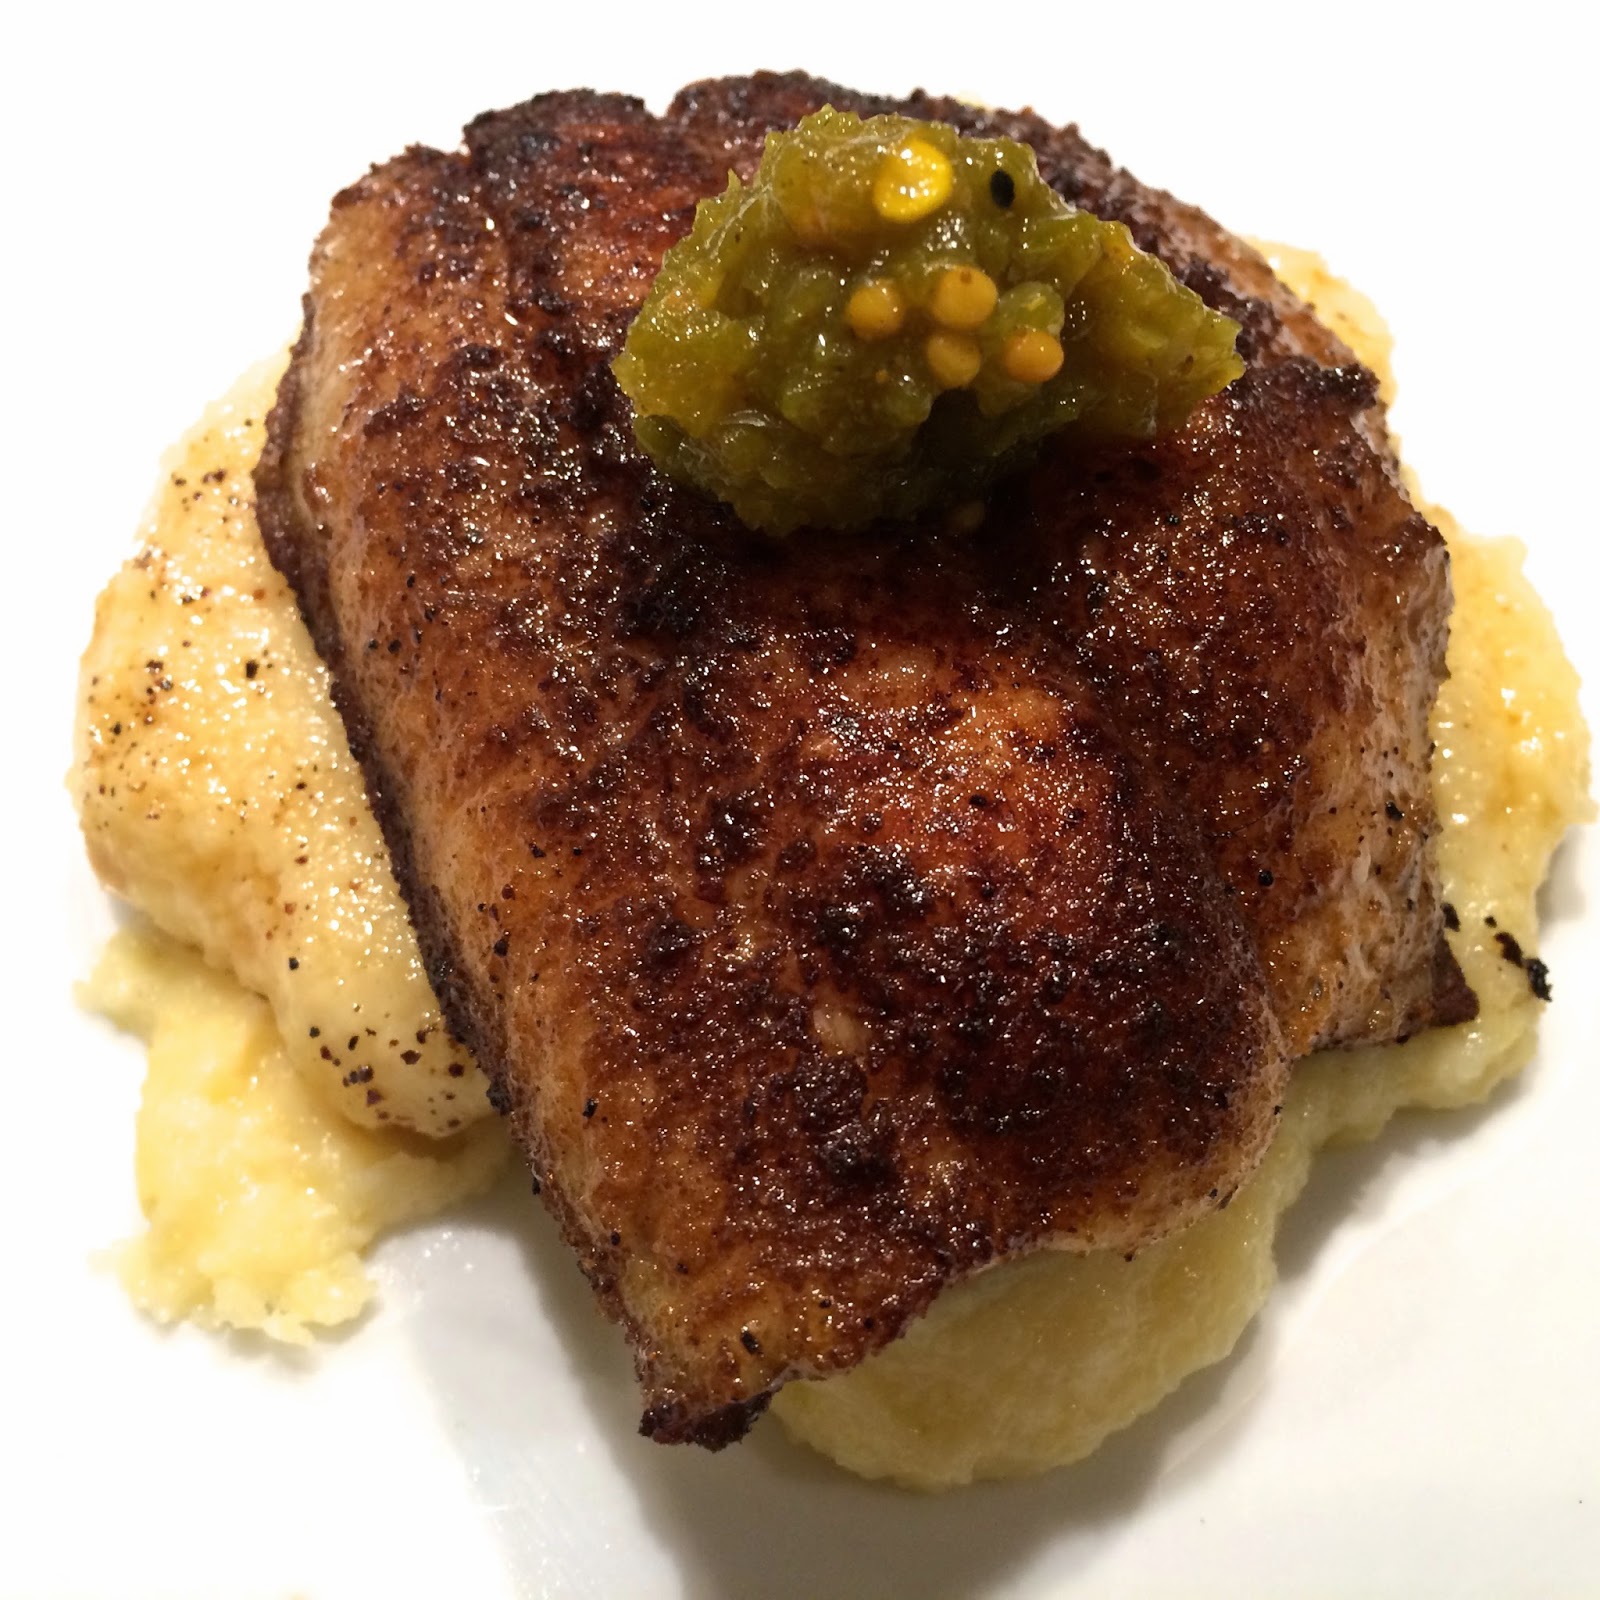 Blackened Catfish over Smoked Gouda Grits topped with Pickled Jalapeño Relish